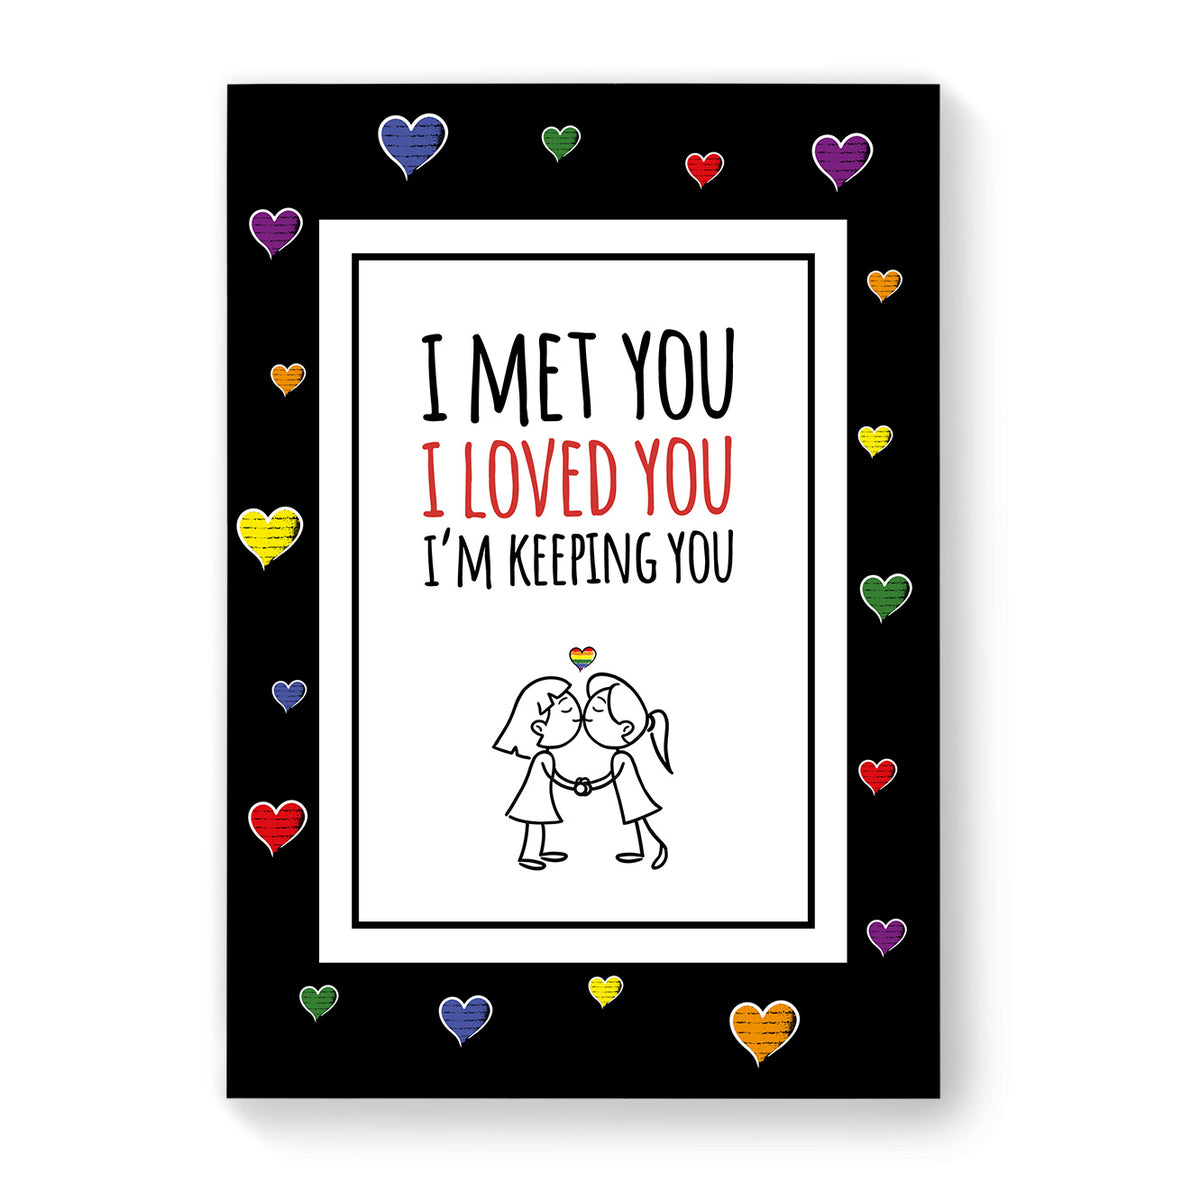 I Met You, I Loved You - Lesbian Gay Couple Card - Black Heart | Gift